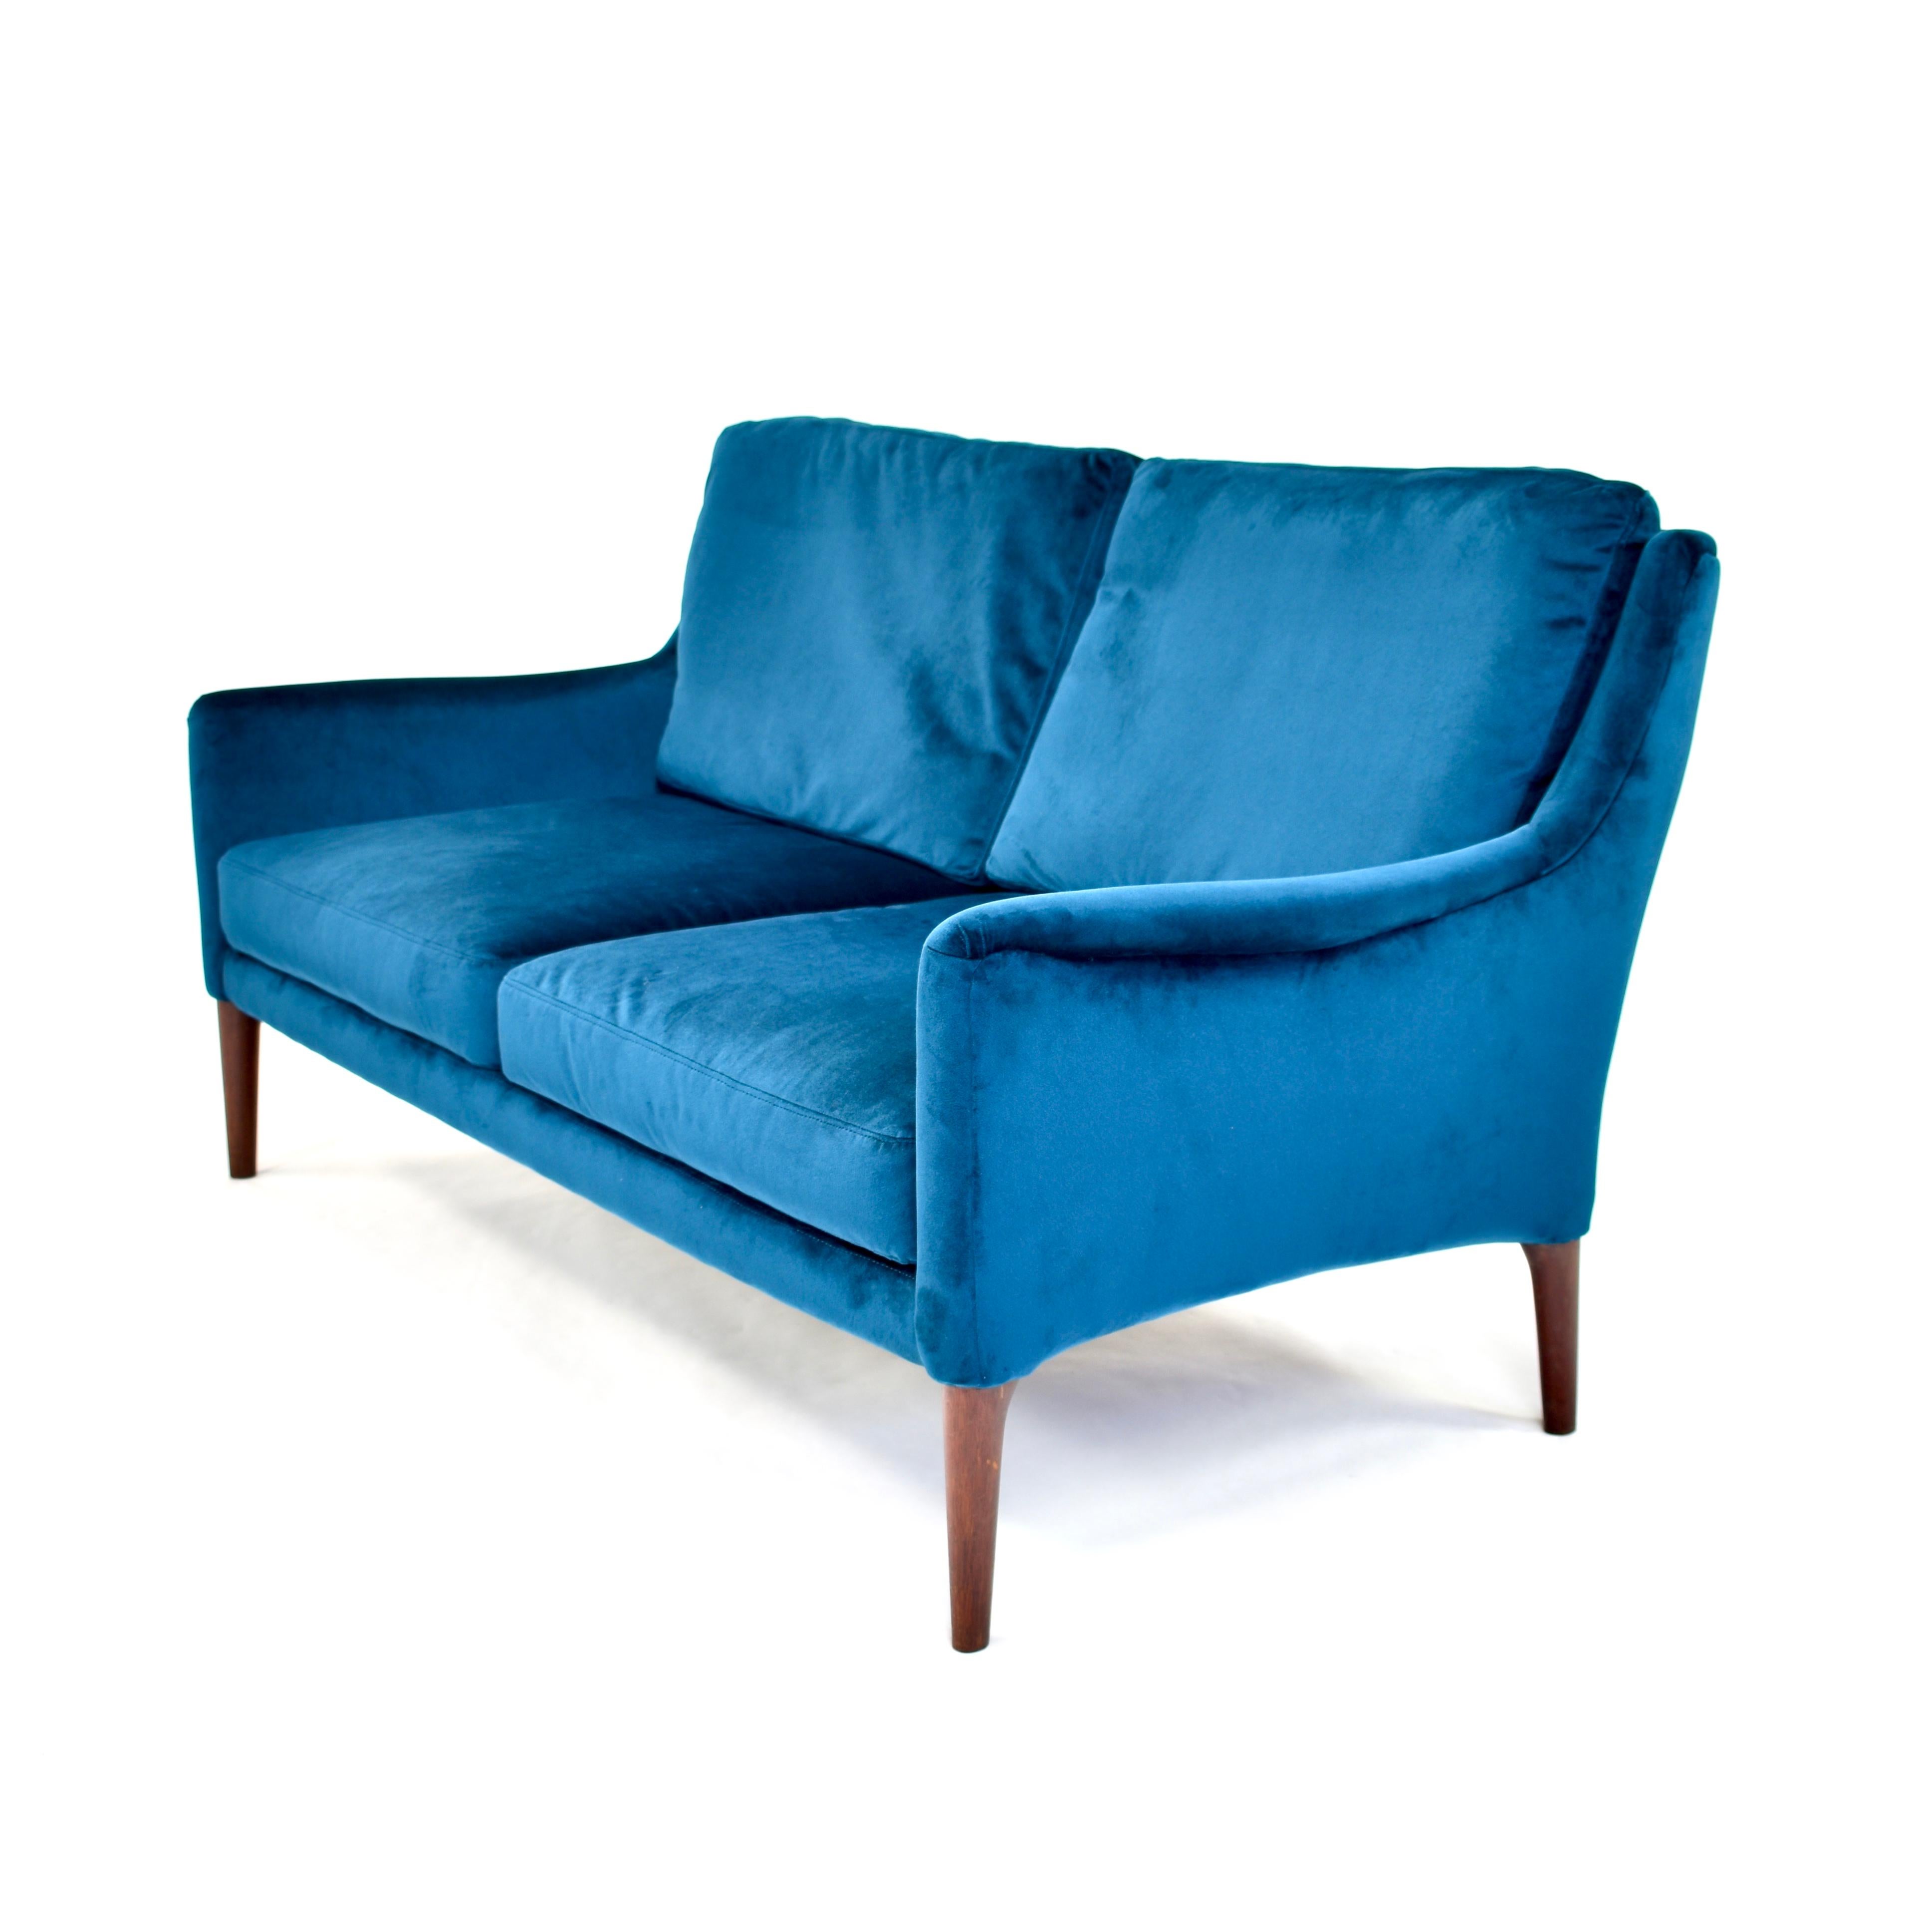 Elegant Danish two-seat sofa in beautiful Emerald green velvet fabric and solid teak legs. (In the pictures the fabric appears to be blue but it is emerald green).
The sofa is very comfortable and soft to sit in. Feather filling in the